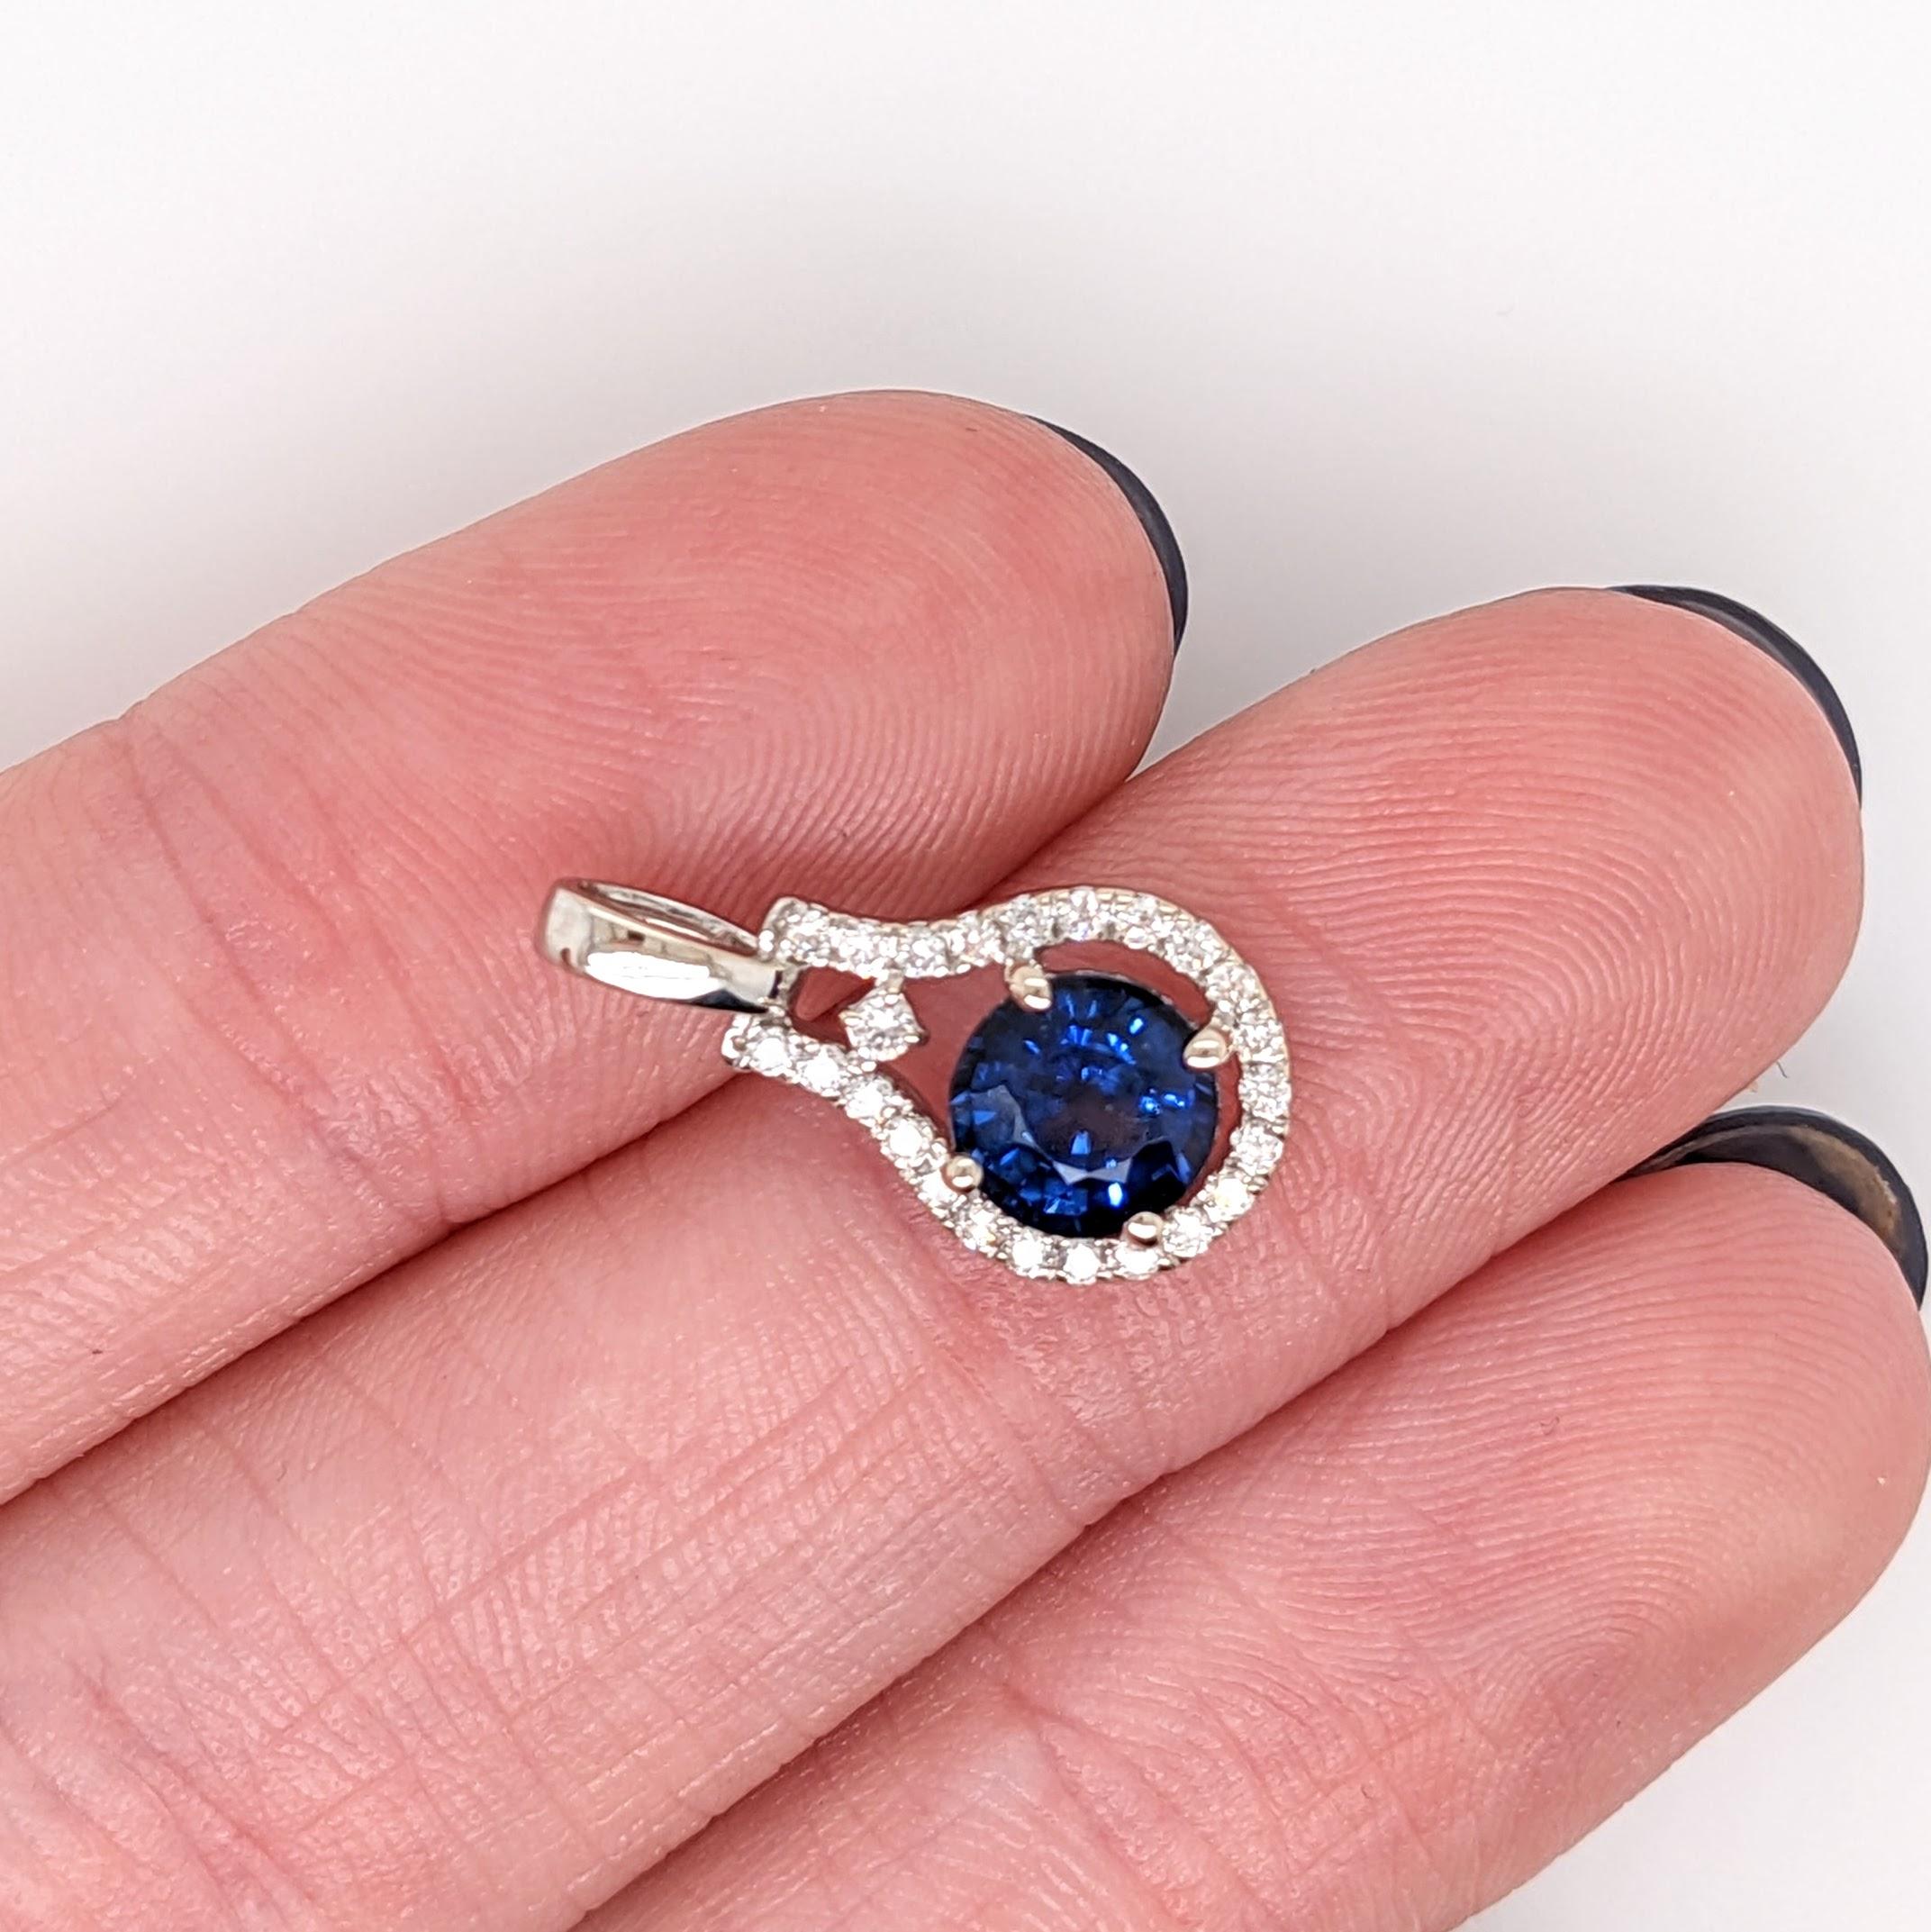 Claim this AAA quality royal Blue Sapphire pendant for your personal jewelry collection! Set in our most popular pendant design with natural Diamond accents and made in 14k solid White Gold. Let us know if you would like an appraisal certificate